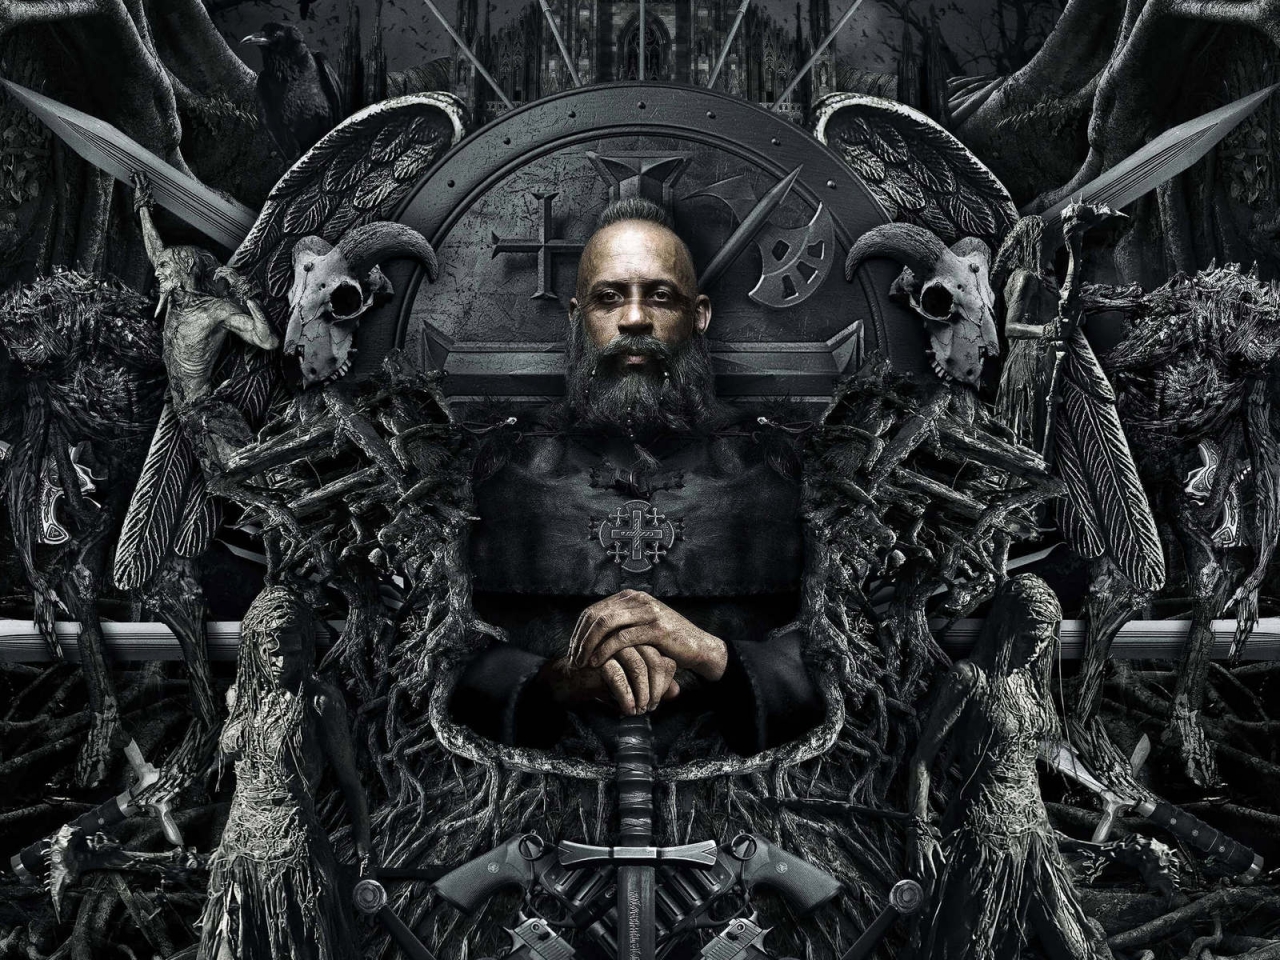 The Last Witch Hunter Throne for 1280 x 960 resolution